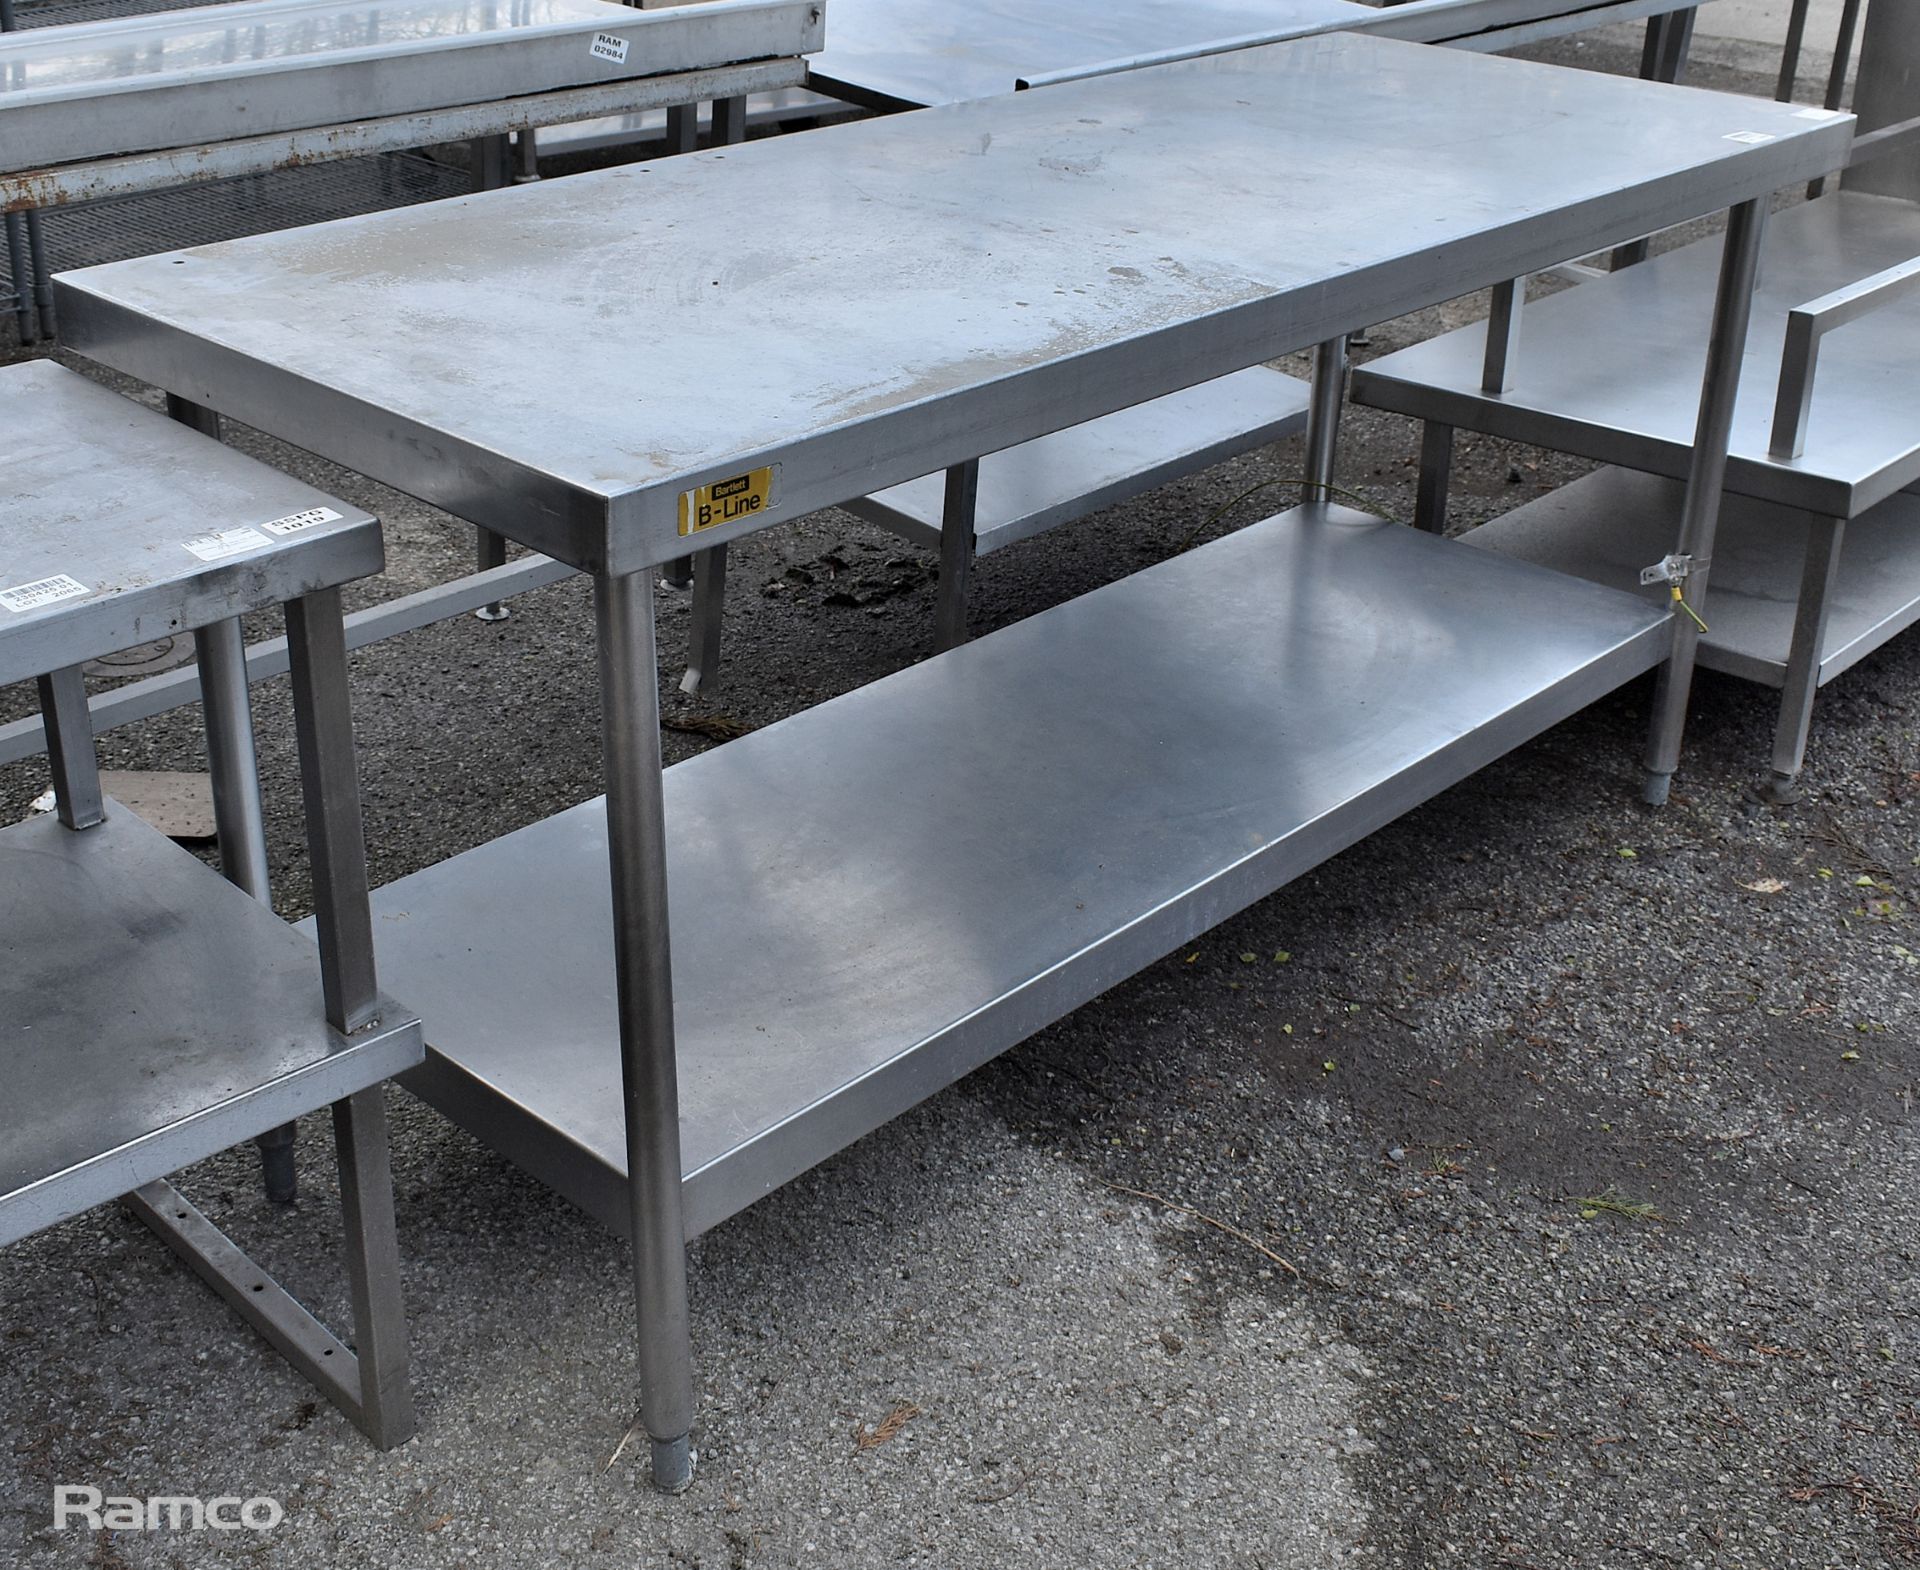 Stainless steel table with bottom shelf - L 180 x W 70 x H 87cm - Image 2 of 3